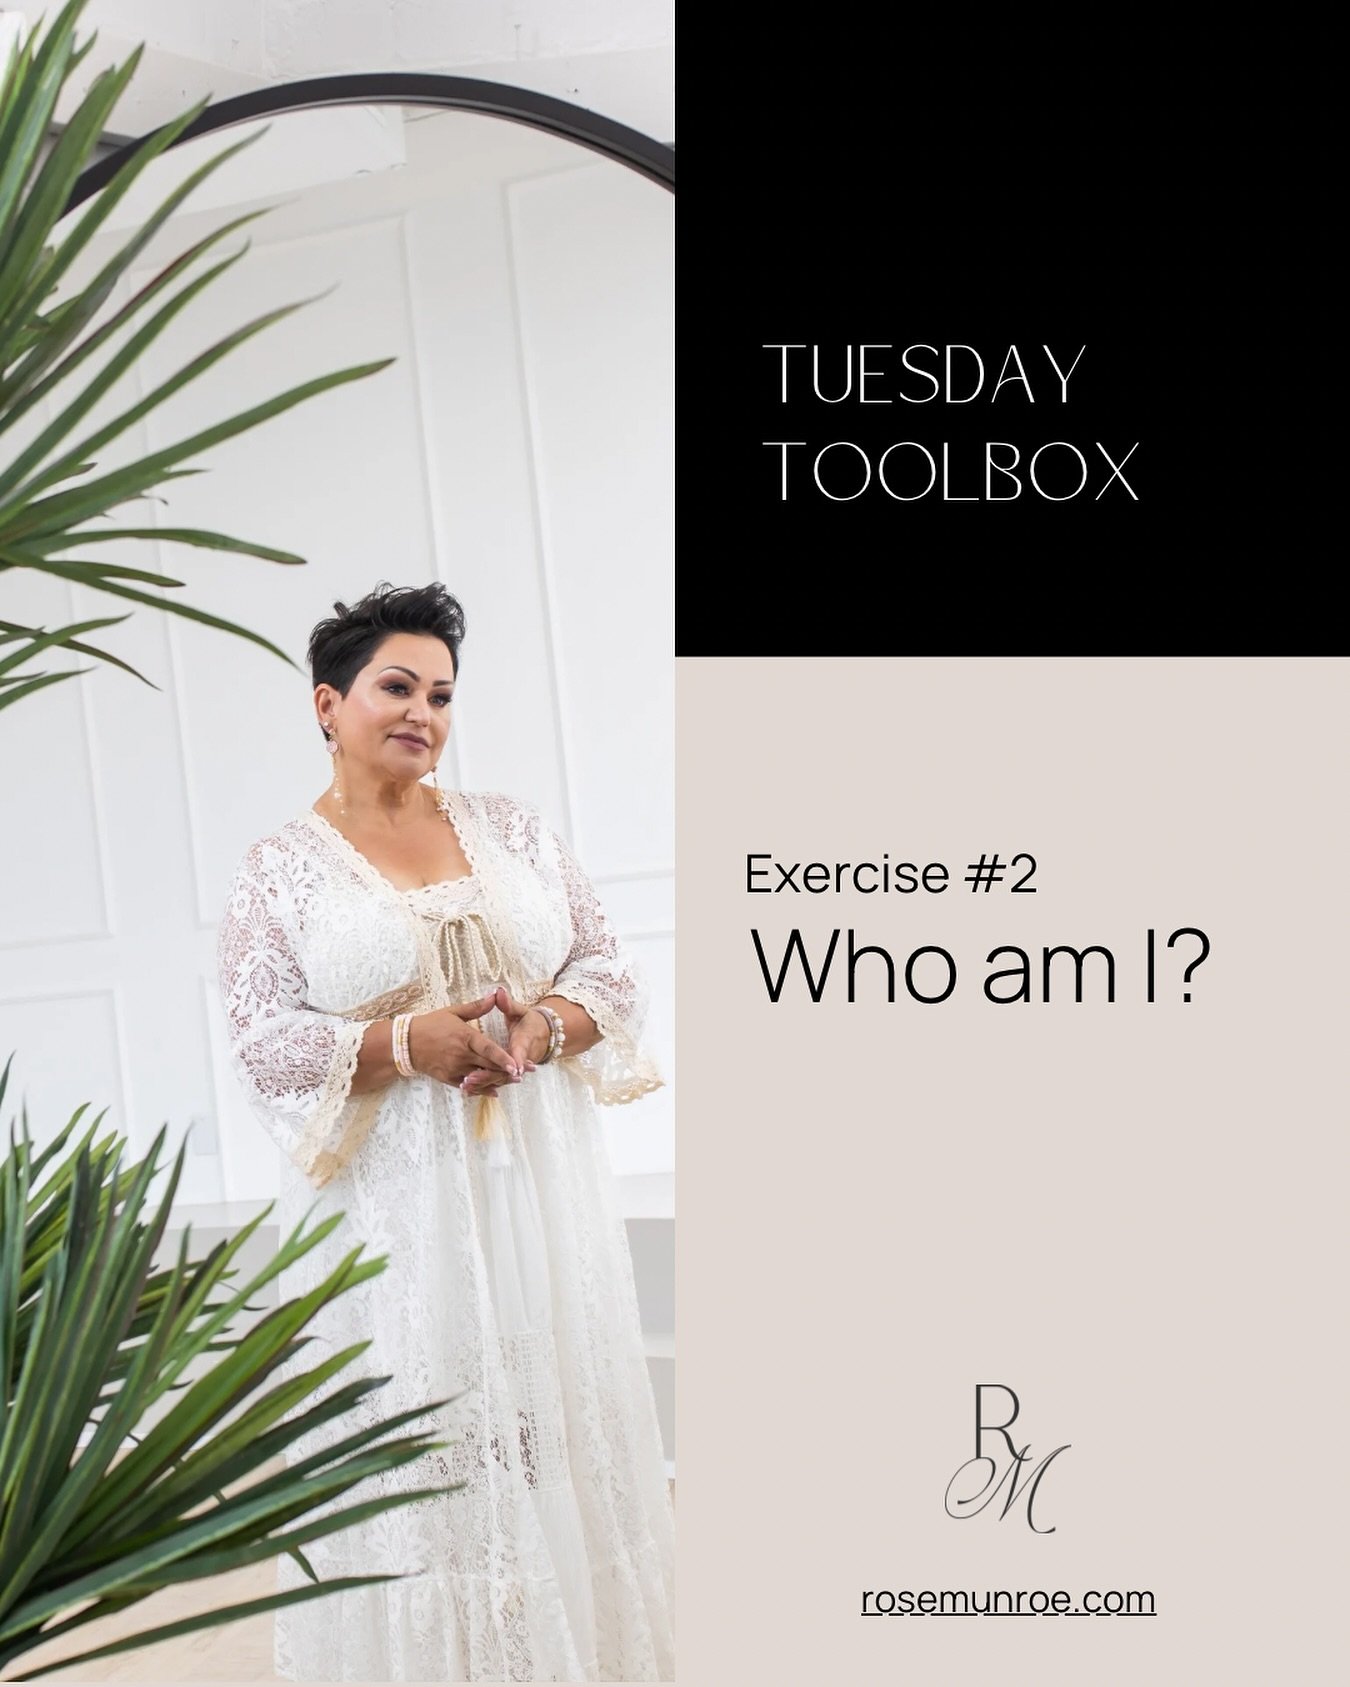 🛠️&nbsp;**Tuesday Toolbox**&nbsp;🛠️

Welcome to my Tuesday Toolbox! 🧰

Introducing tool #️⃣2️⃣ - Who am I? 💕

You will identify - through elimination - the five qualities you value MOST about yourself! 

Step 1:

Make a list of ALL the qualities 